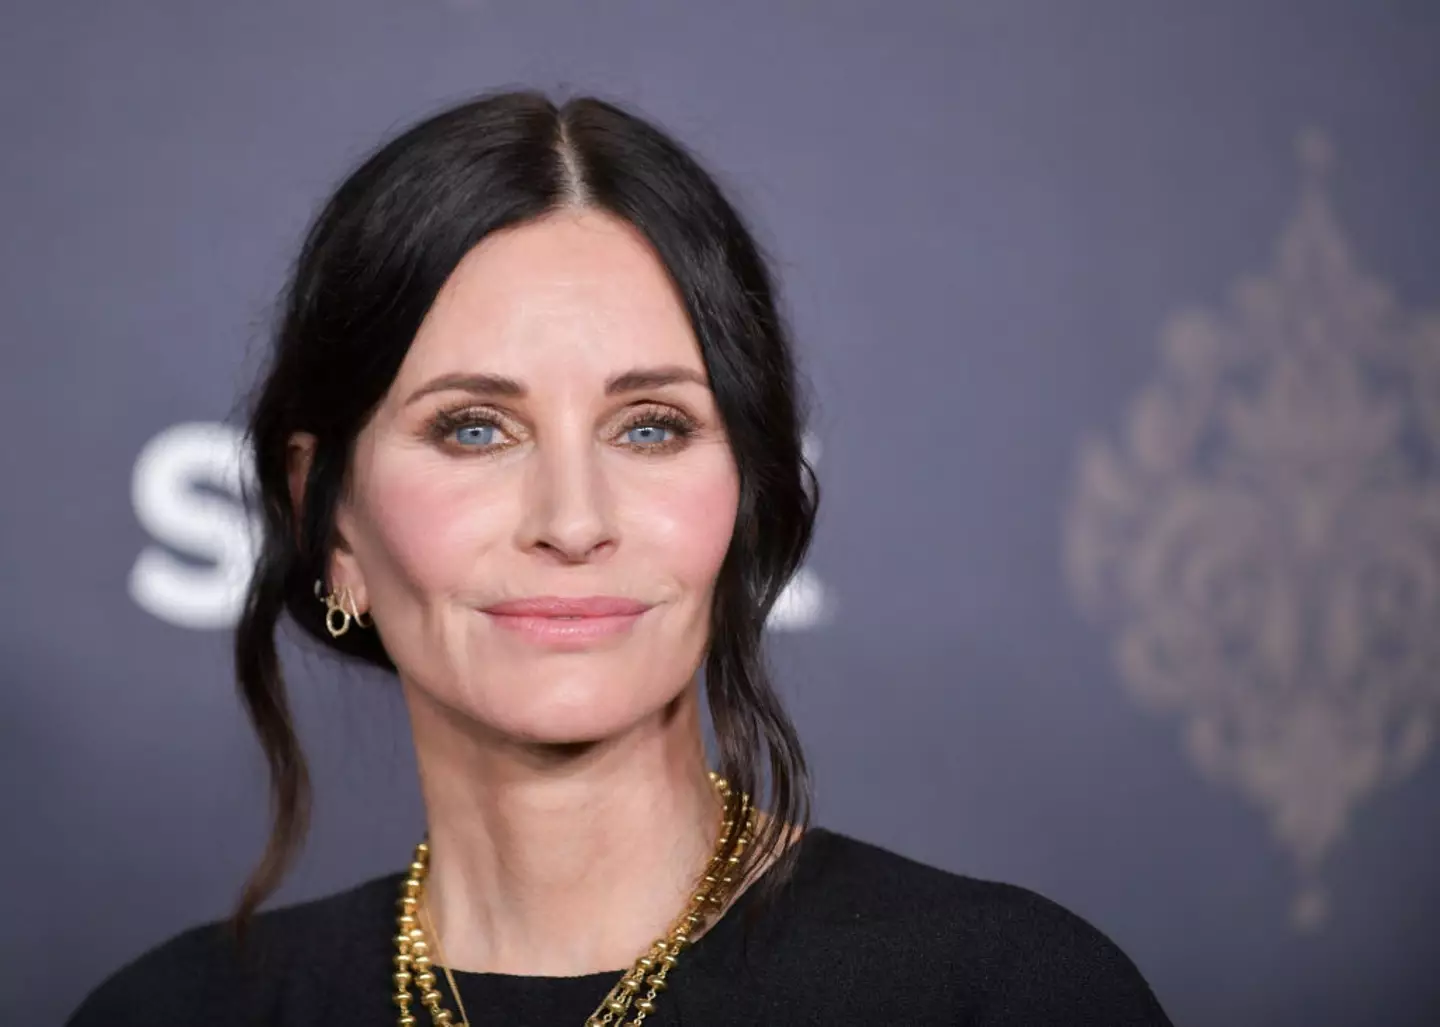 Courteney Cox has opened up about her face filler regrets. (Rodin Eckenroth/WireImage)